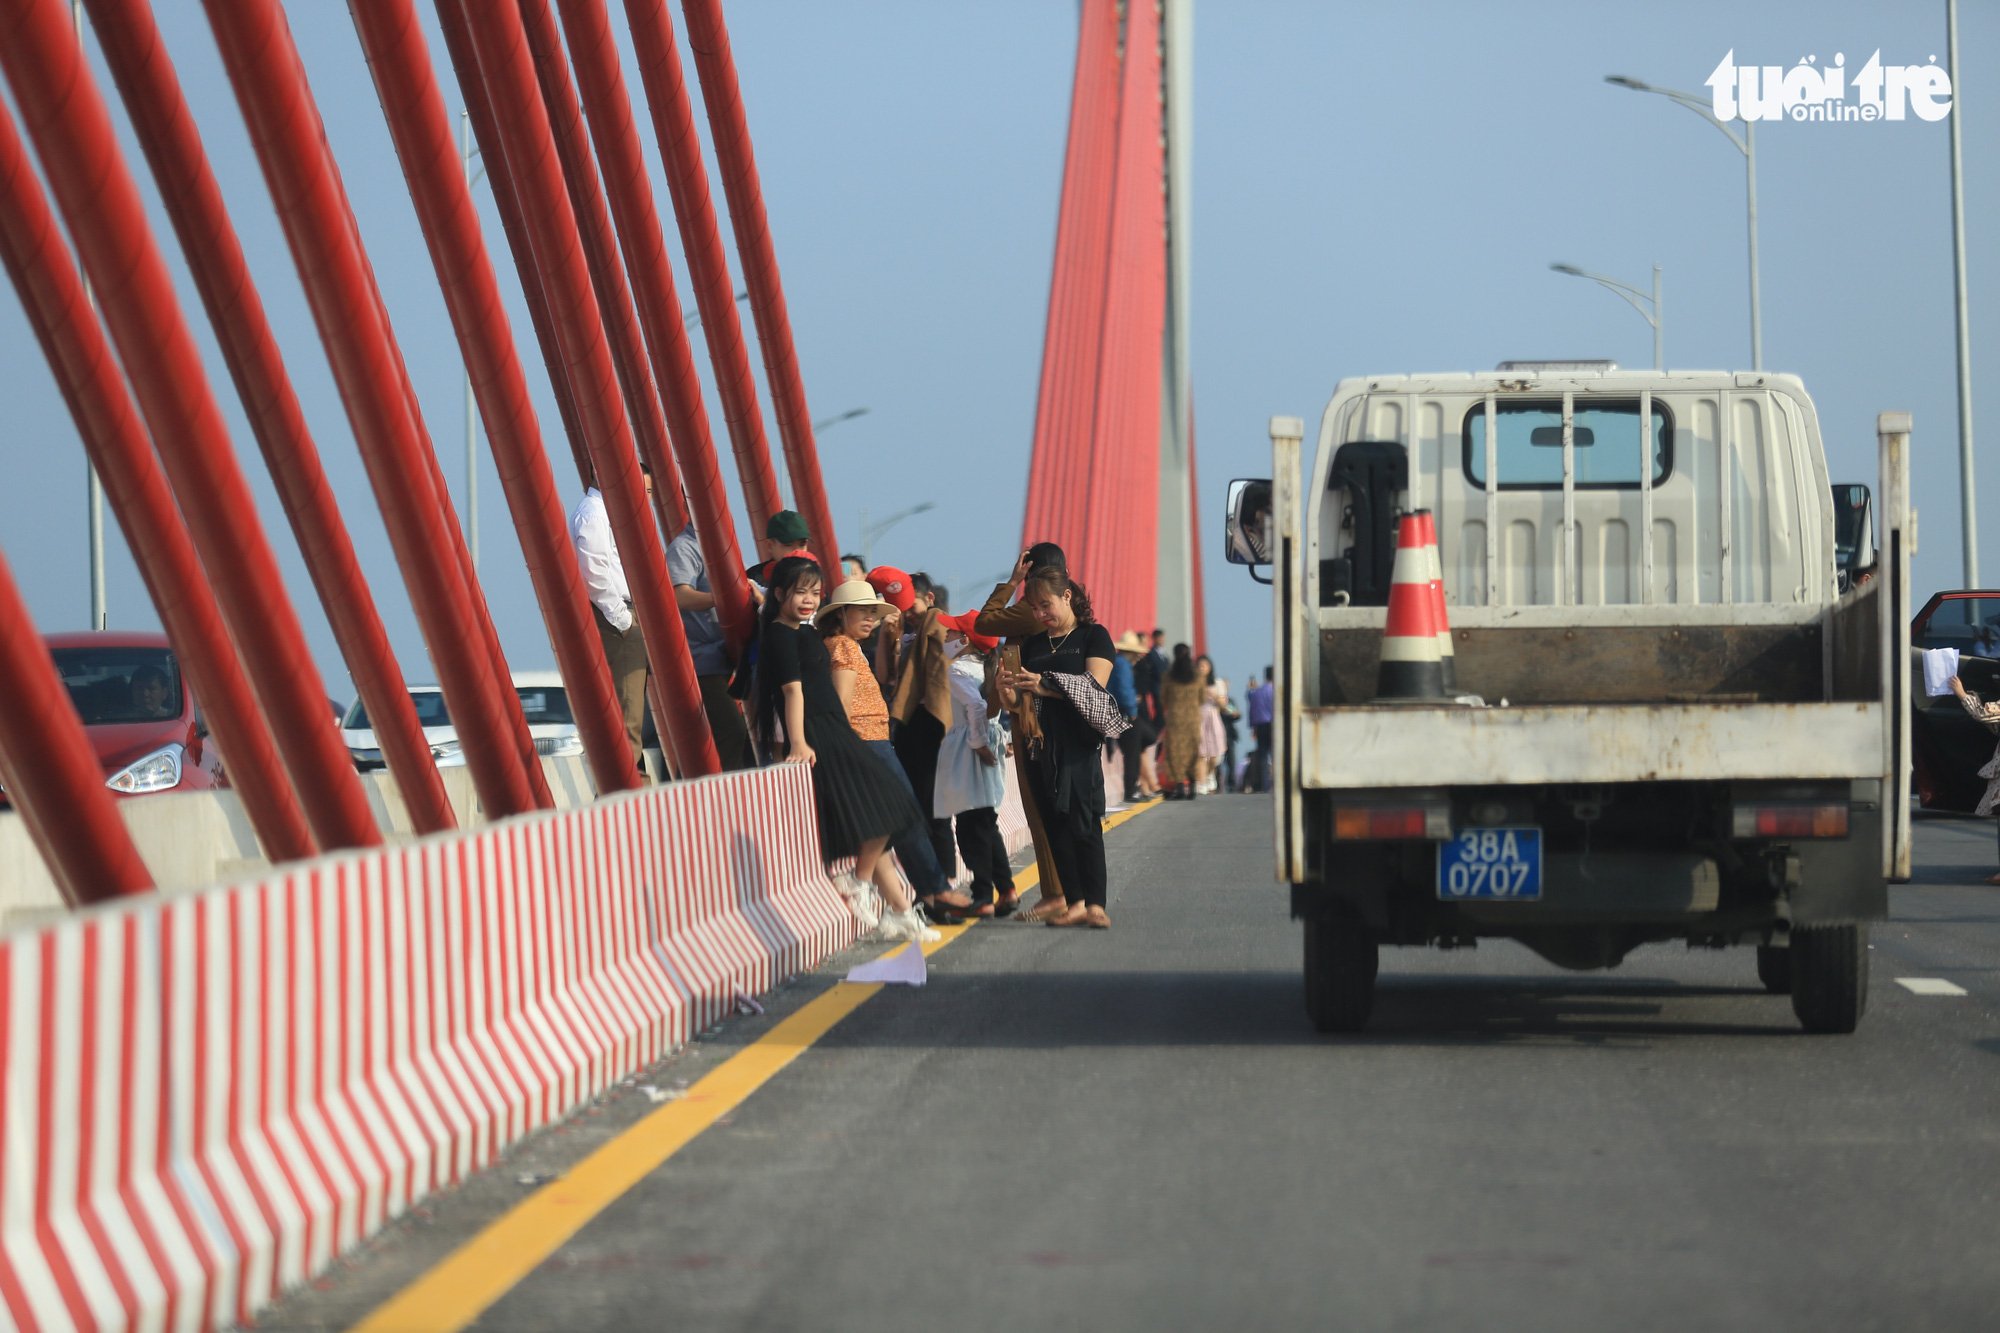 A group of people continue taking photos while traffic police officers patrol in front of them on the Cua Hoi Bridge in north-central Vietnam, February 15, 2021. Photo: Ngoc Thang / Tuoi Tre